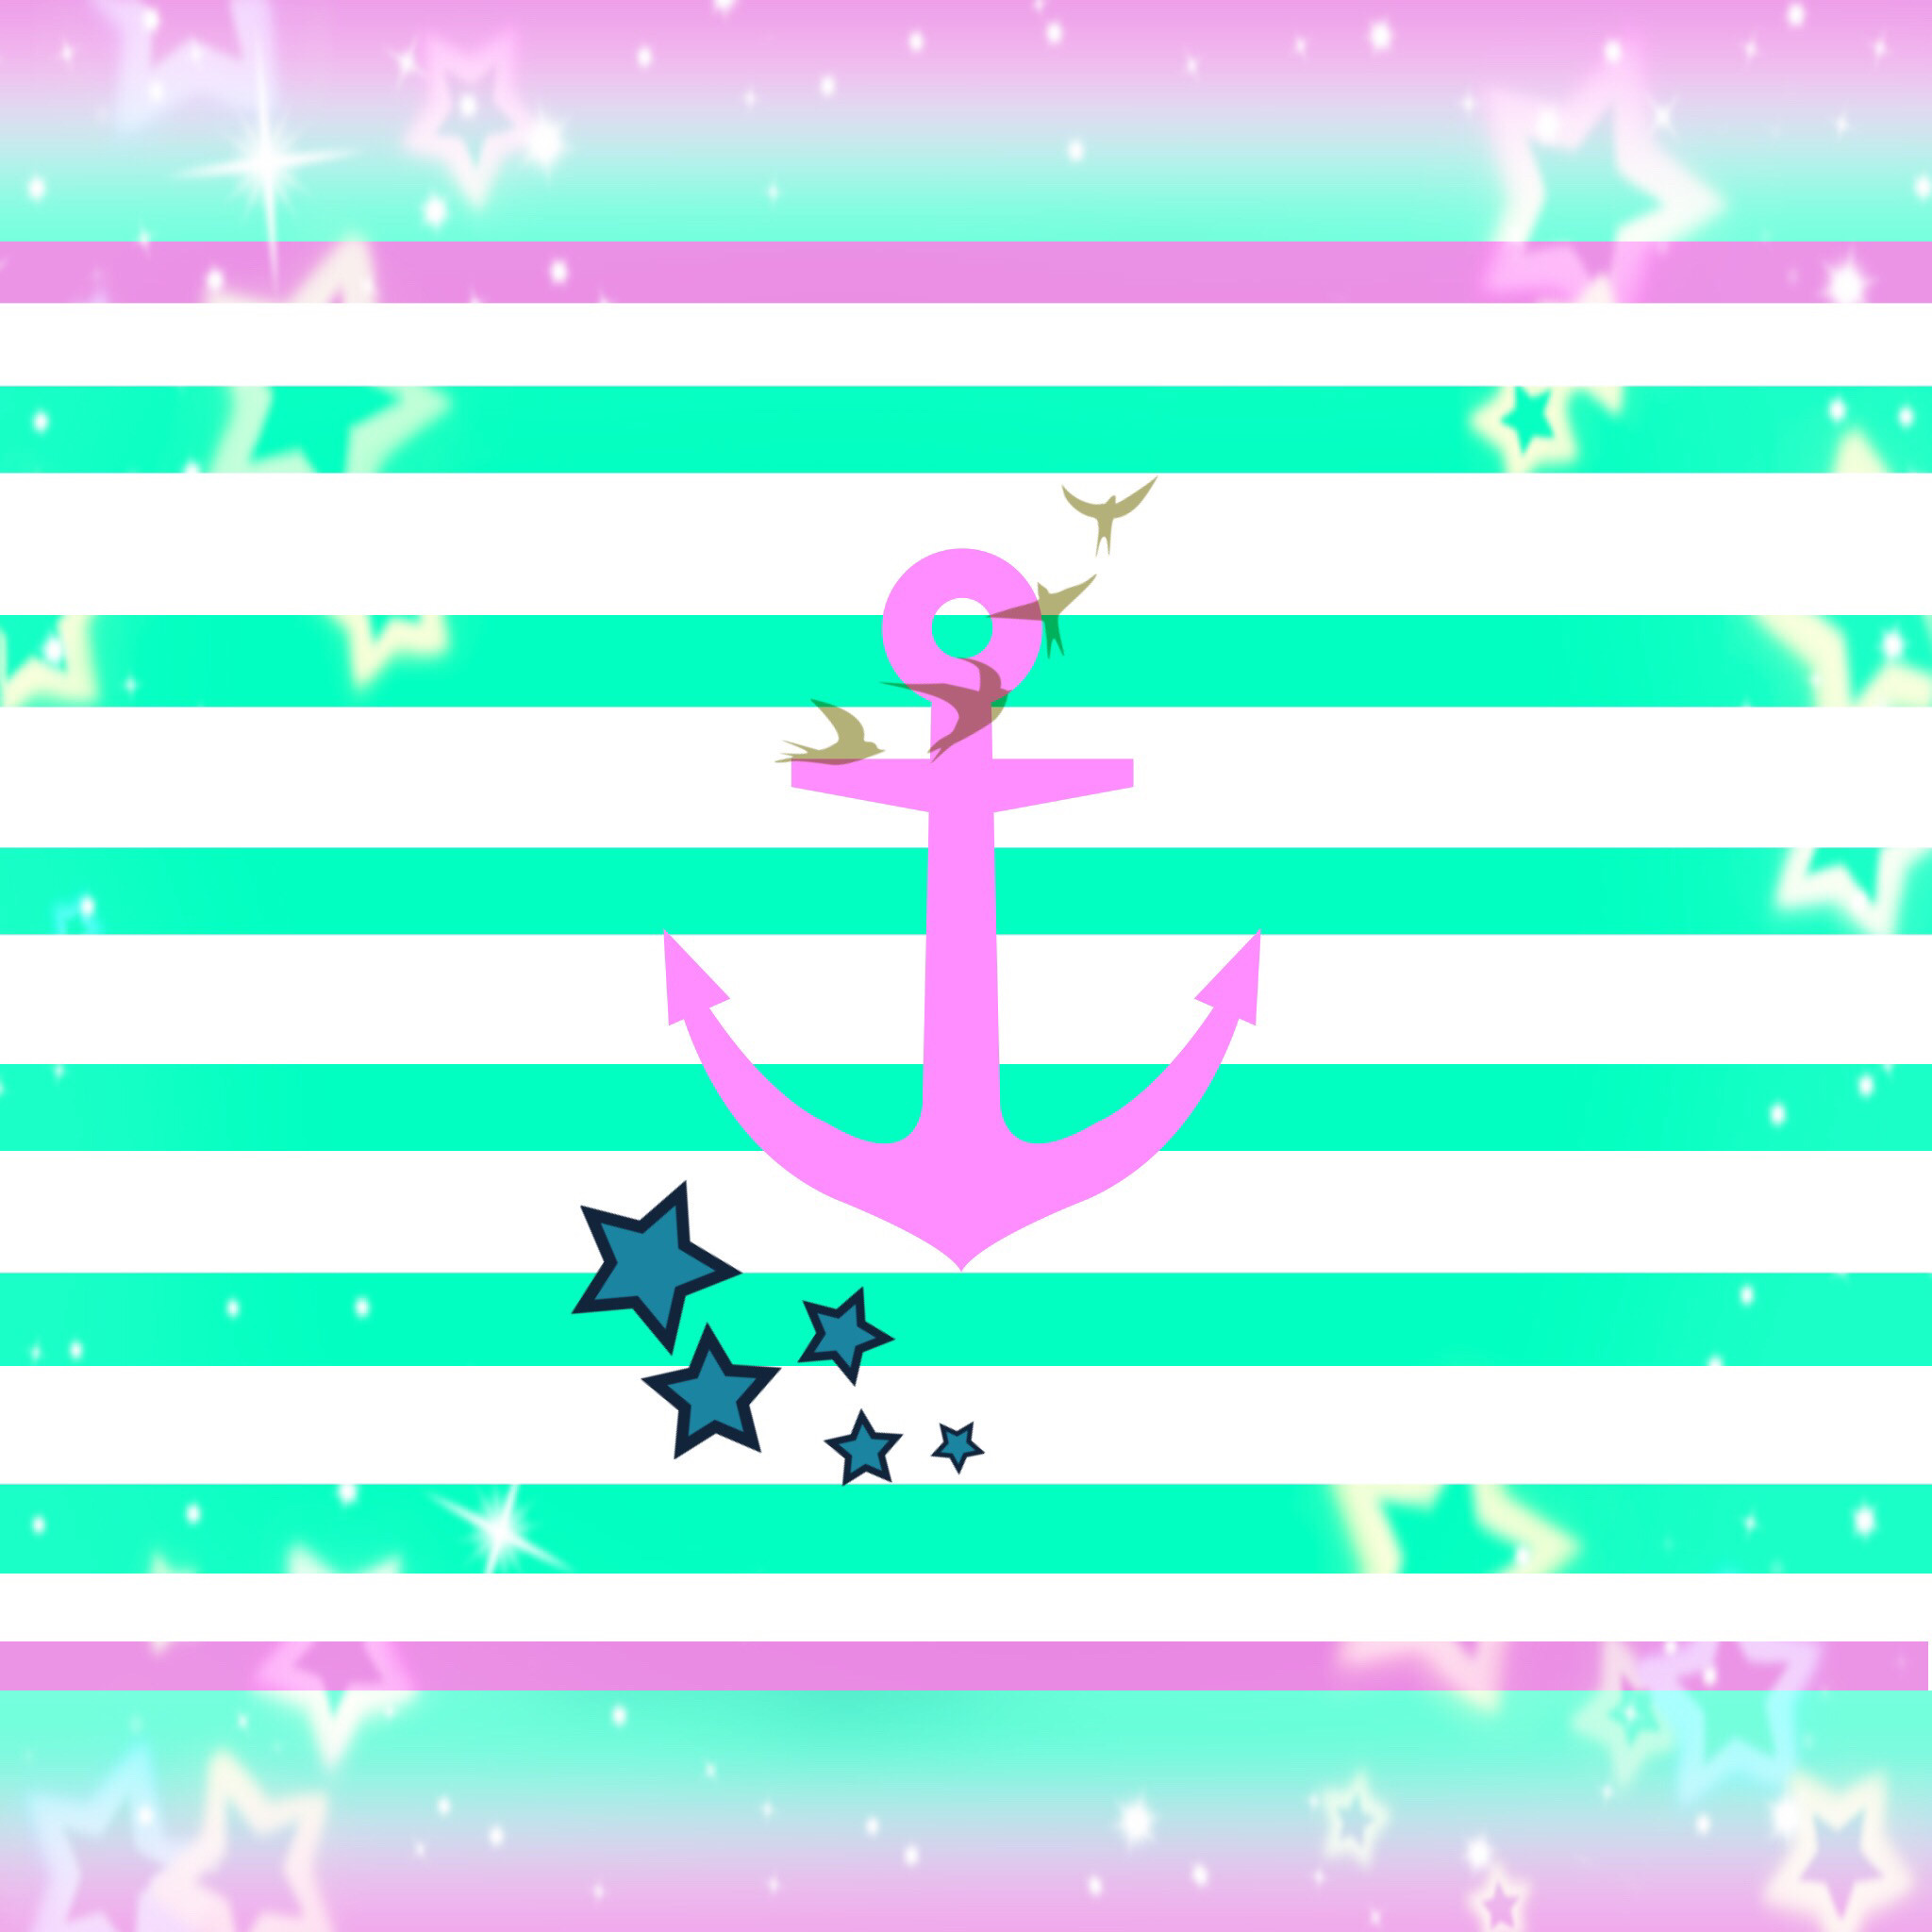 2048x2048 Cell Phone Wallpapers, Iphone Backgrounds, Wallpaper Backgrounds, Pretty  Wallpapers, Anchor Wallpaper, Design Patterns, Nautical, Girly, Anchors